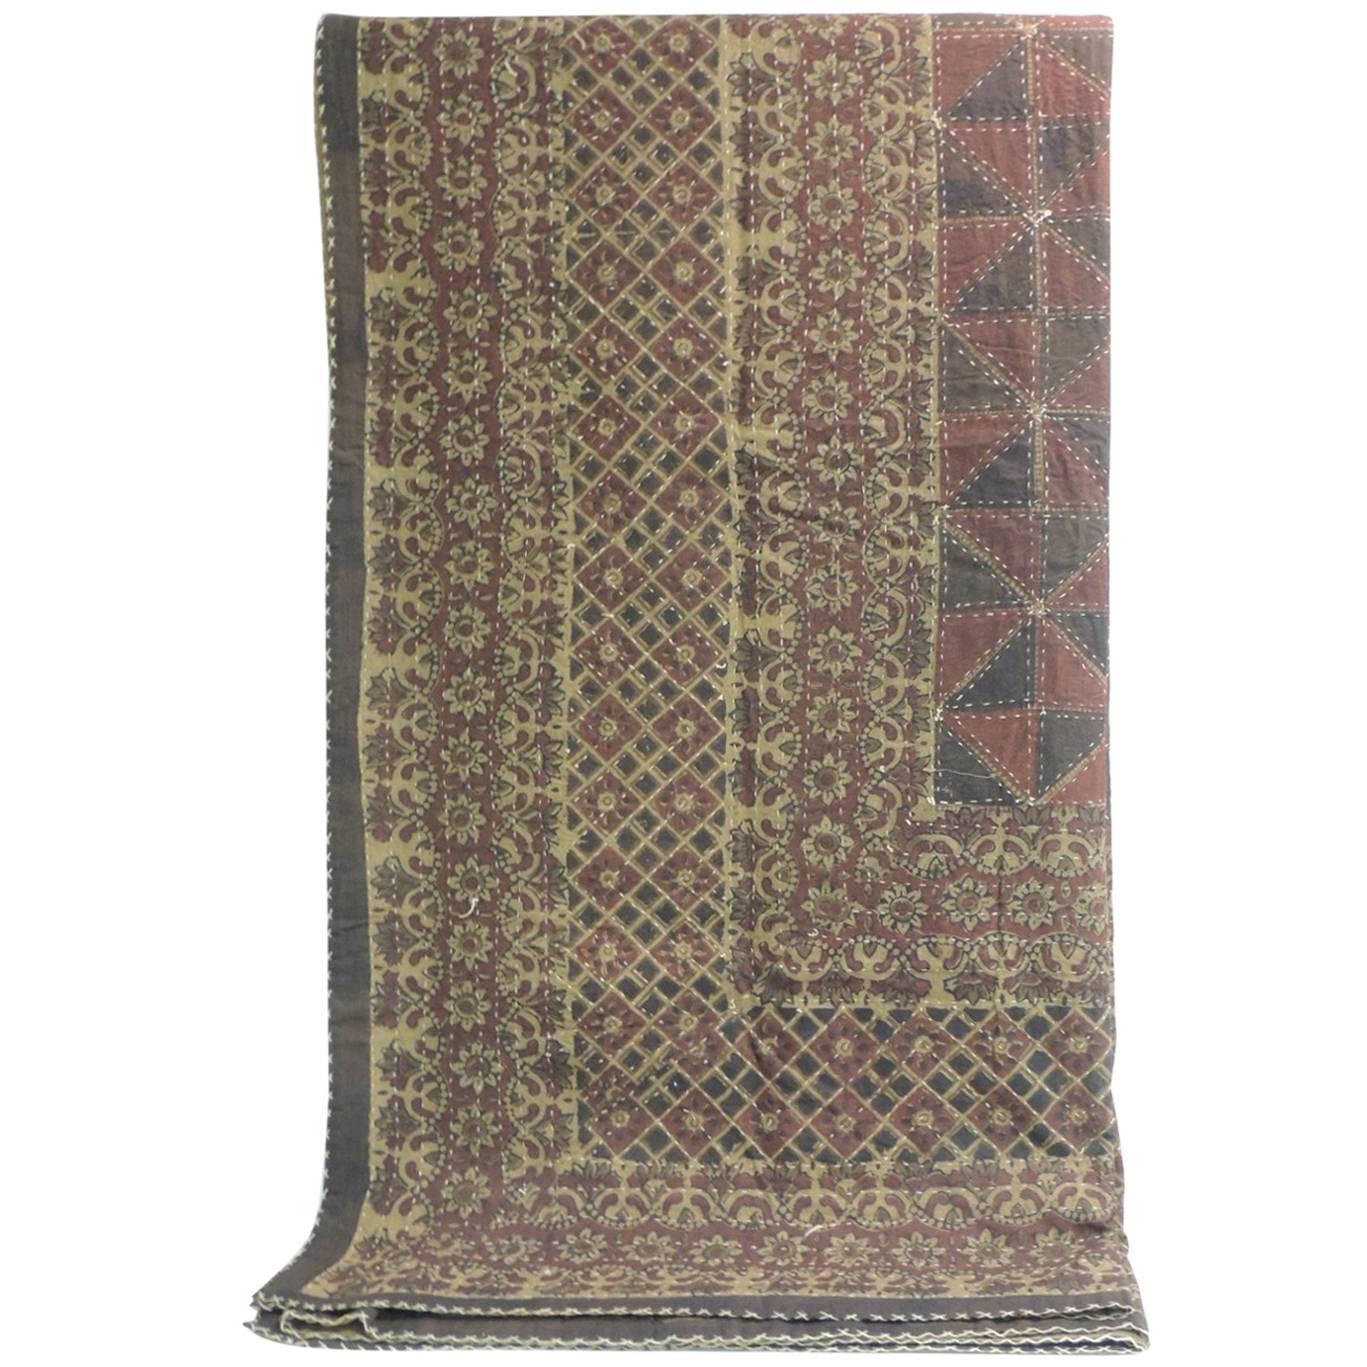 Large vintage quilted Indian Kantha king size blanket. In shades of red. brown, tan, yellow, red, deep blue and natural.
Kantha quilts alongside jamdani are the pride of Bengal (a geopolitical, cultural and historical region in Asia in the